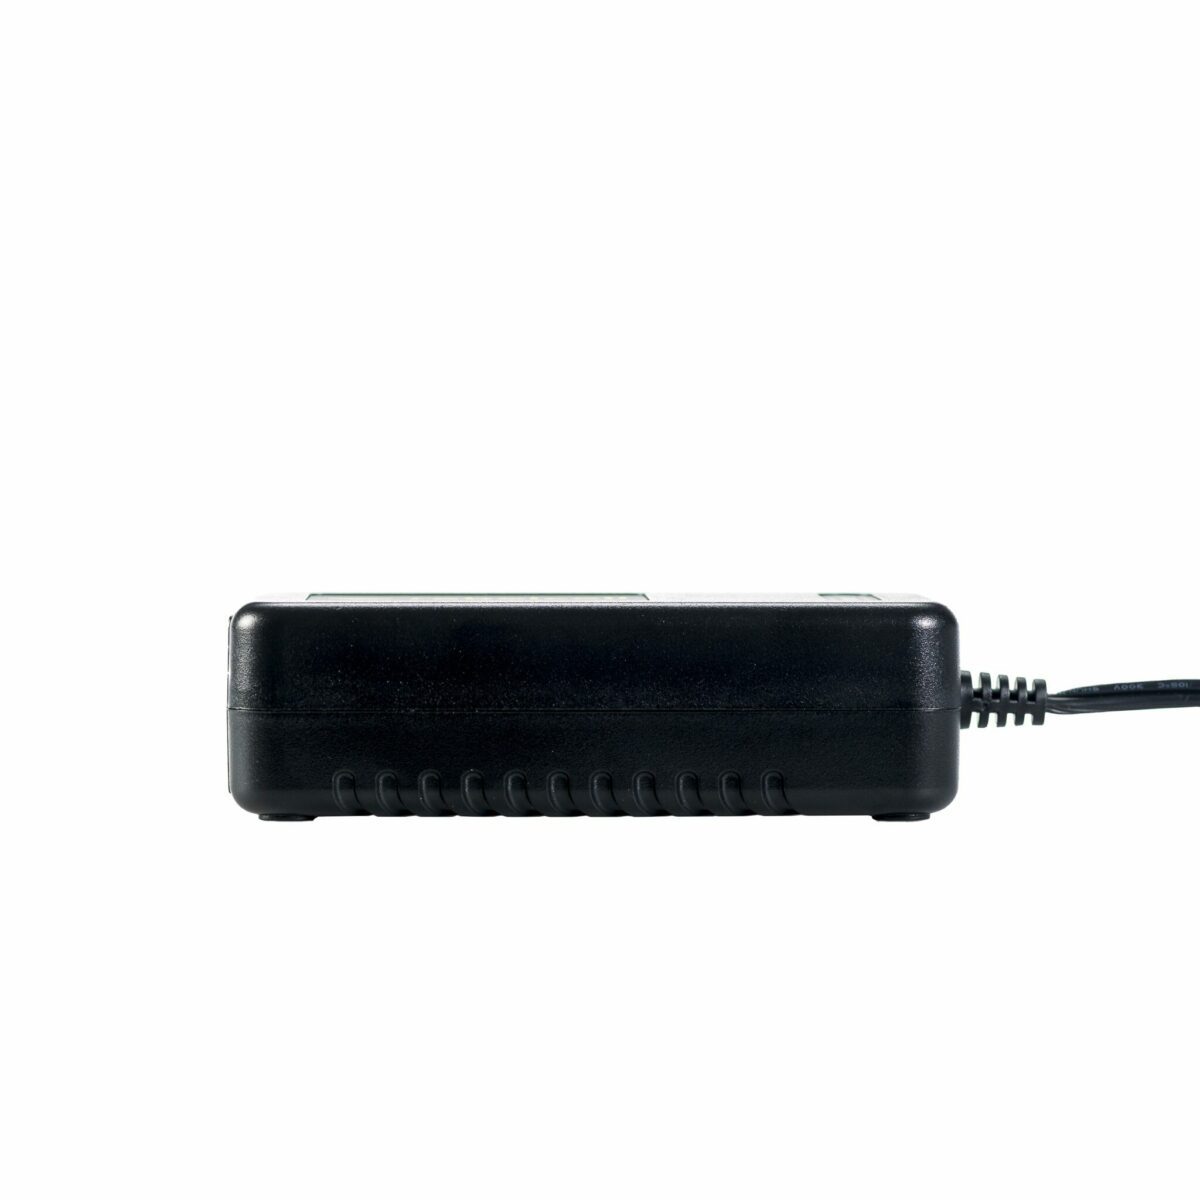 12.6V4A- XT60 Charger product image